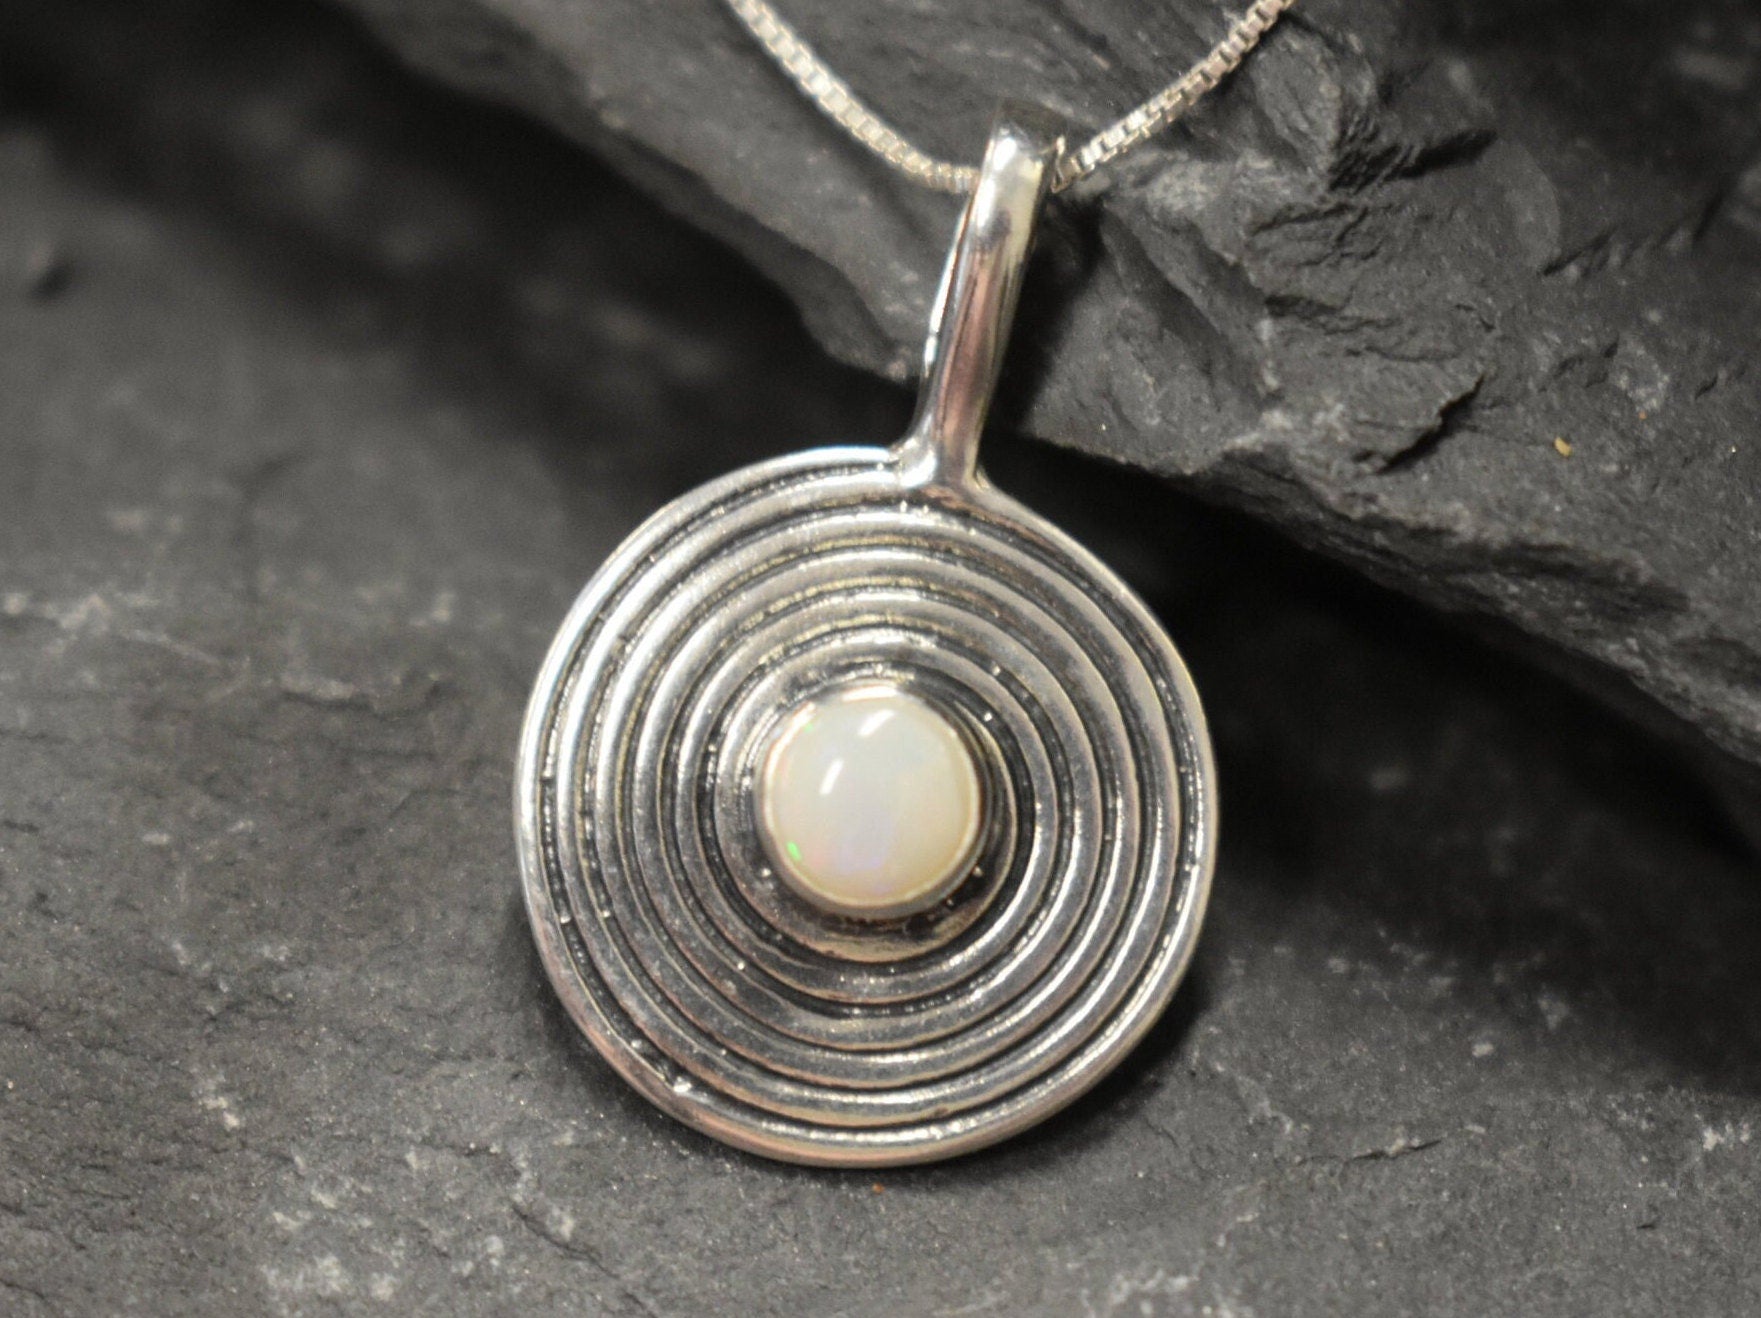 Round Pendant, Opal Pendant, Natural Opal, October Birthstone, Infinity Pendant, Flat Silver Pendant, Fire Opal Pendant, 925 Silver Pendant